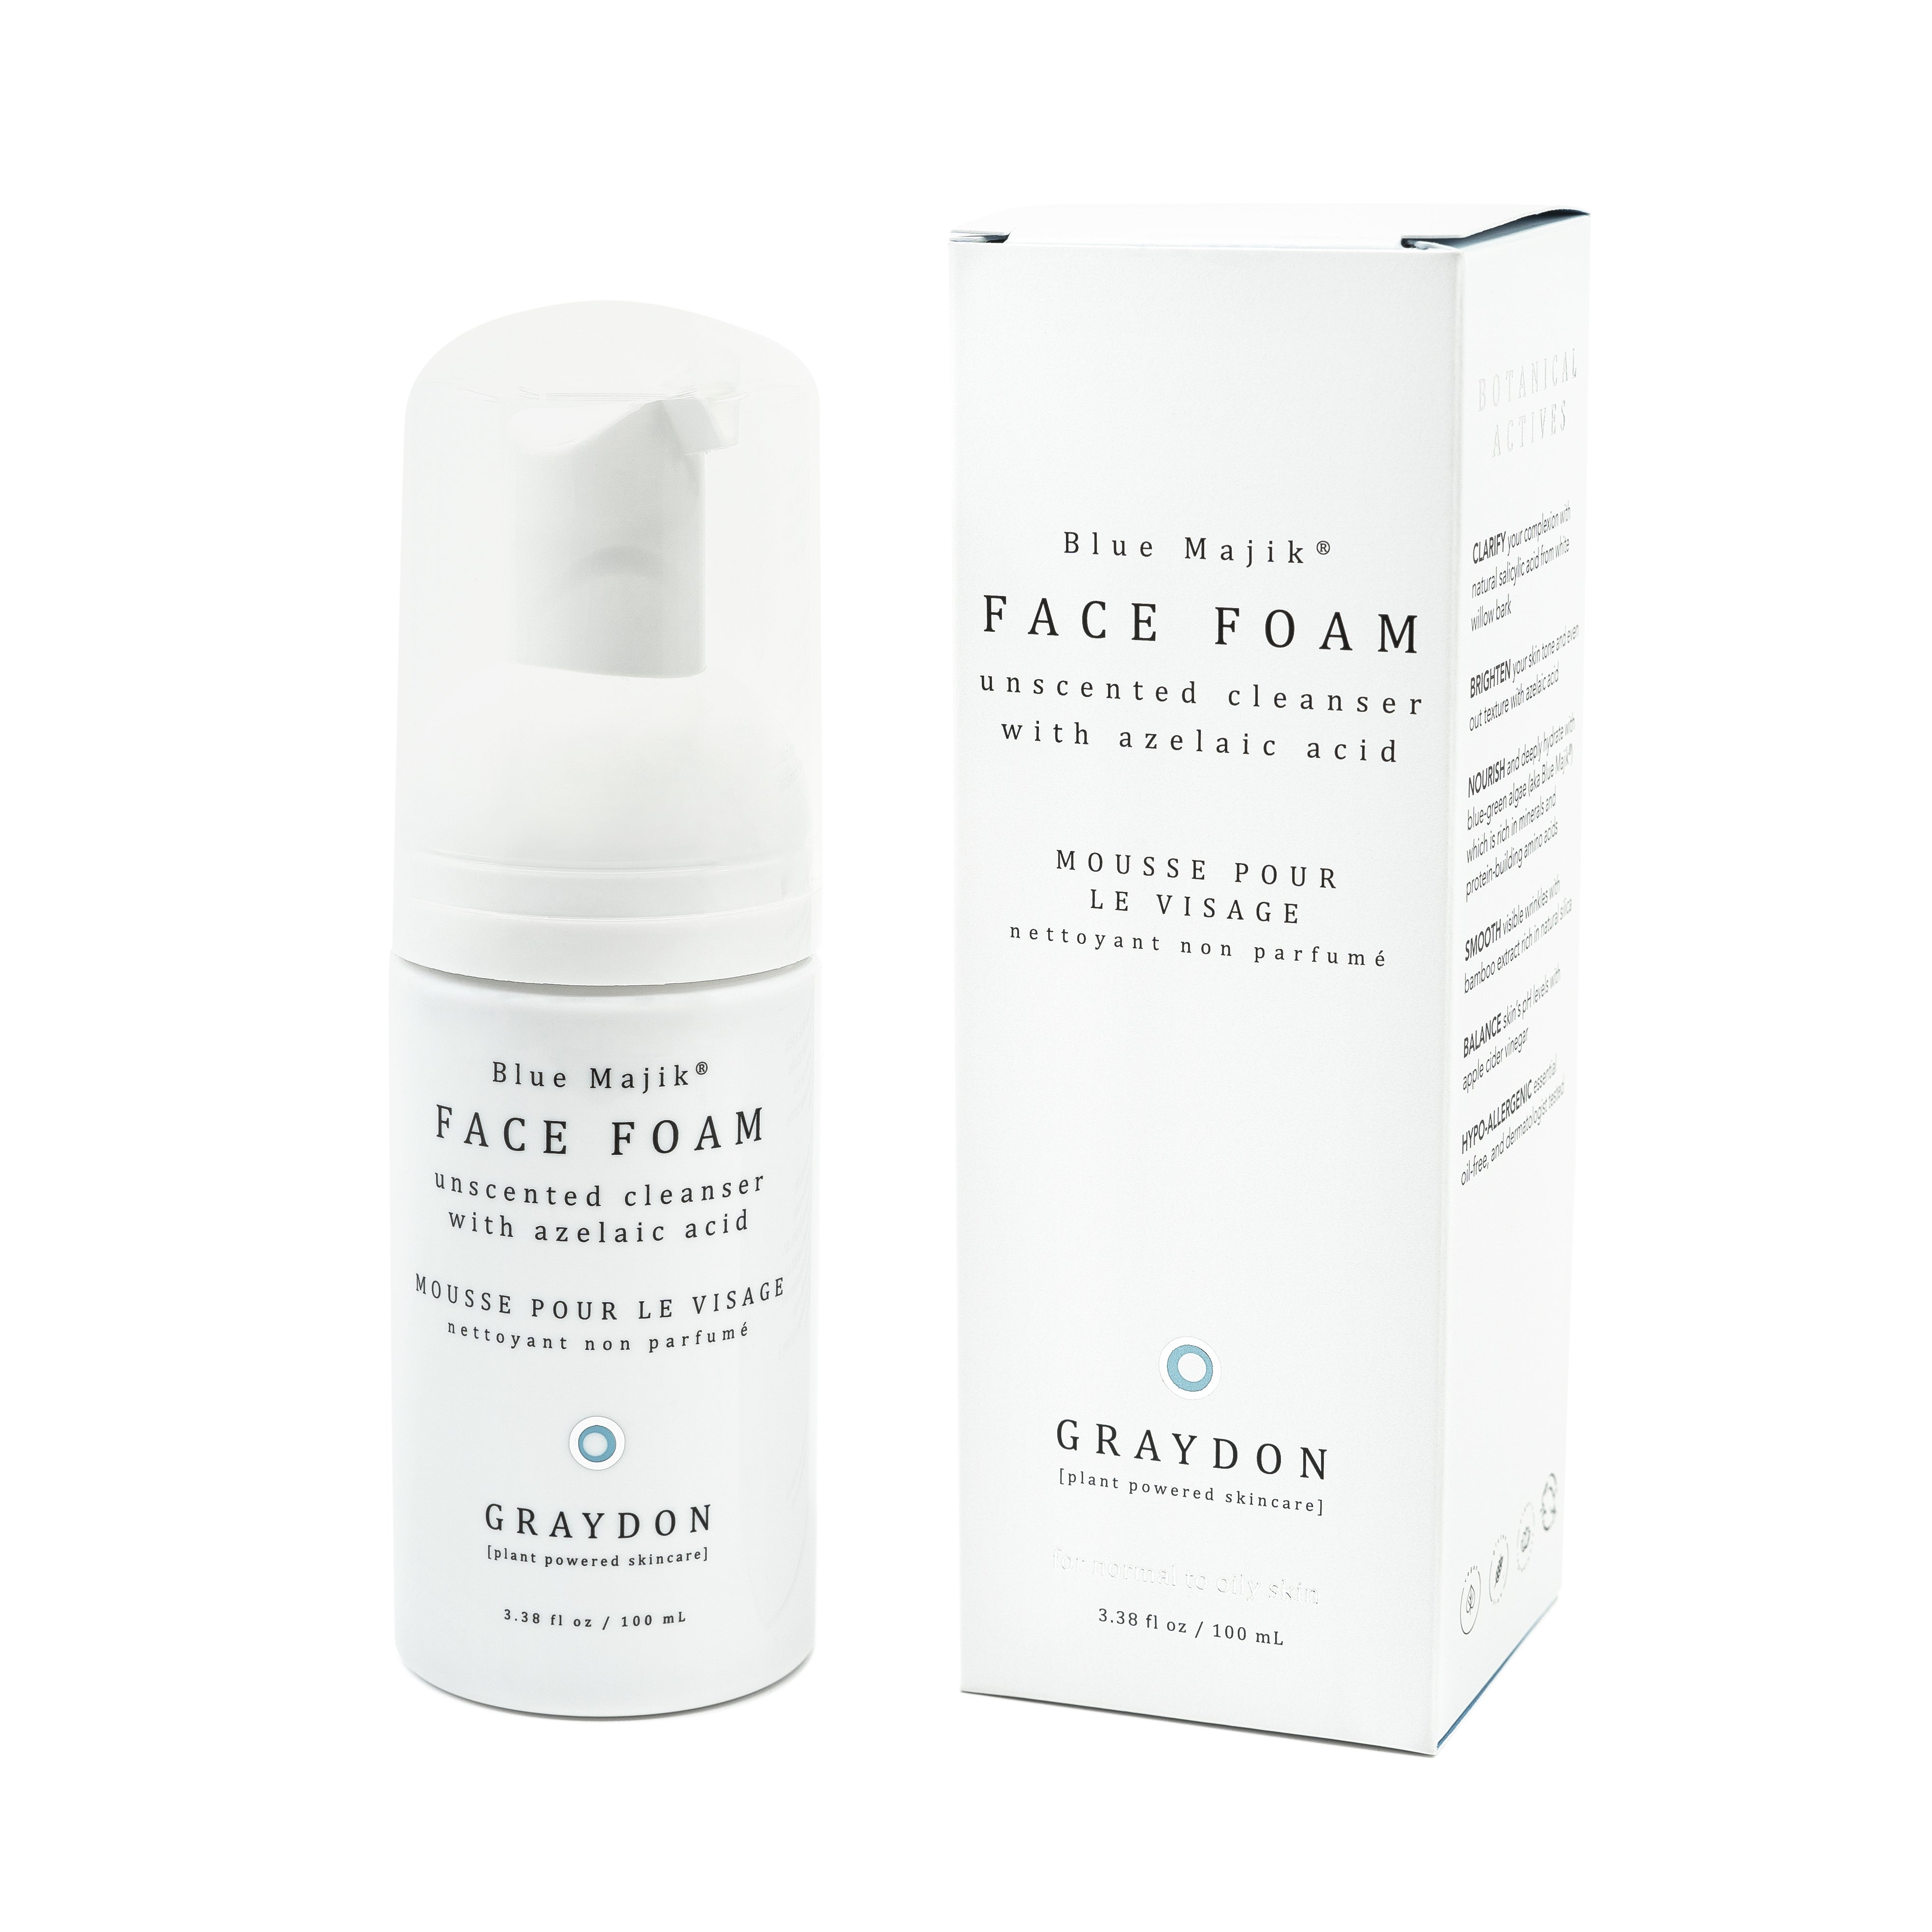 Face Foam - Blue Majik Unscented Cleanser with Azelaic Acid